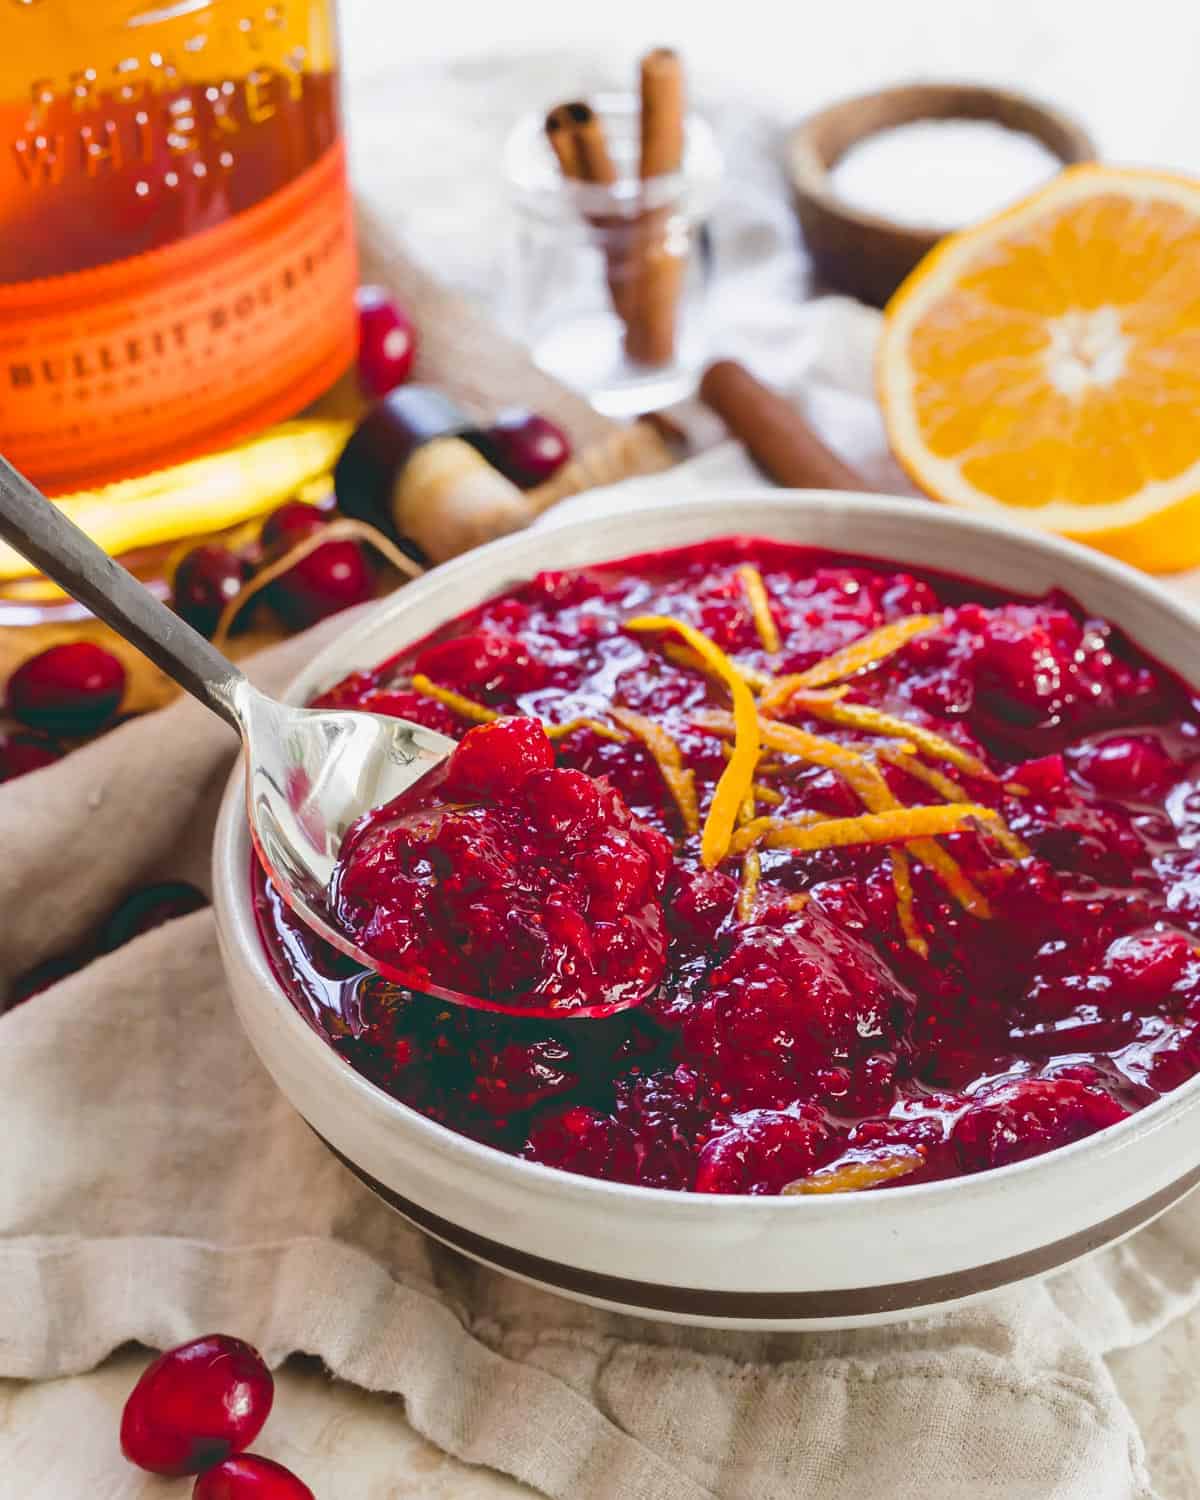 Bourbon cranberry sauce in a bowl with a spoon.